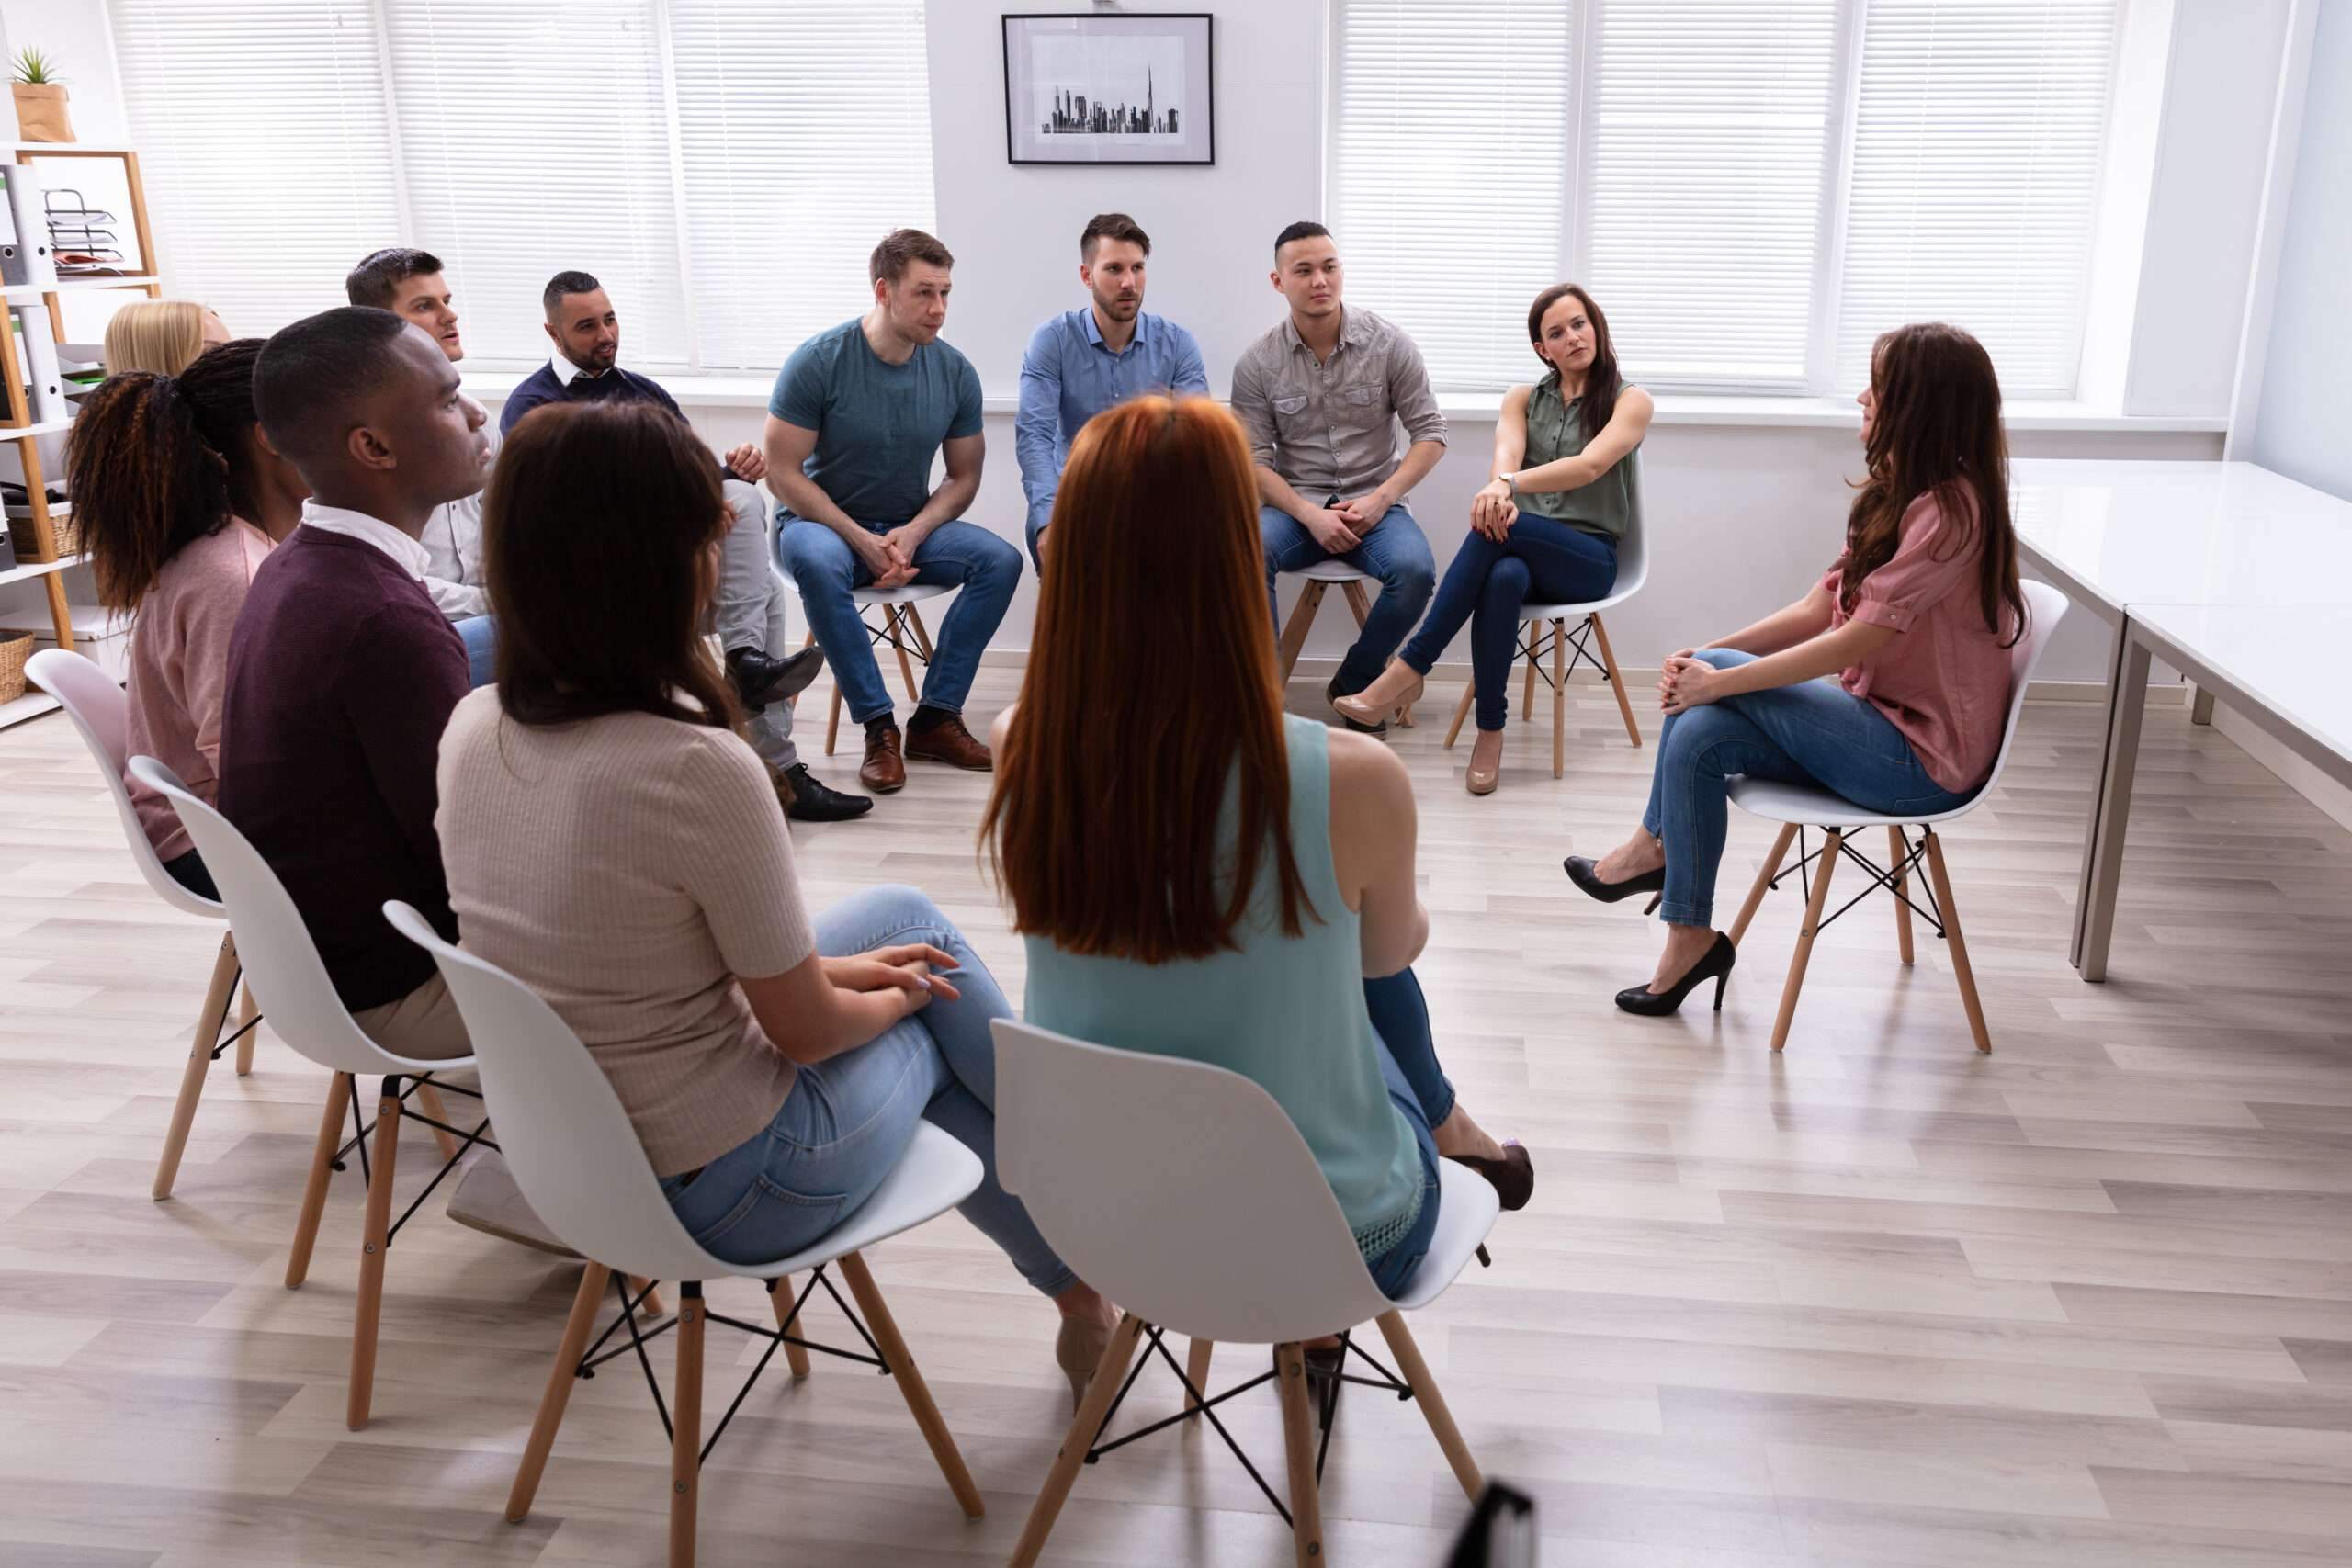 Group Therapy Topics for Adults in Substance Abuse Treatment